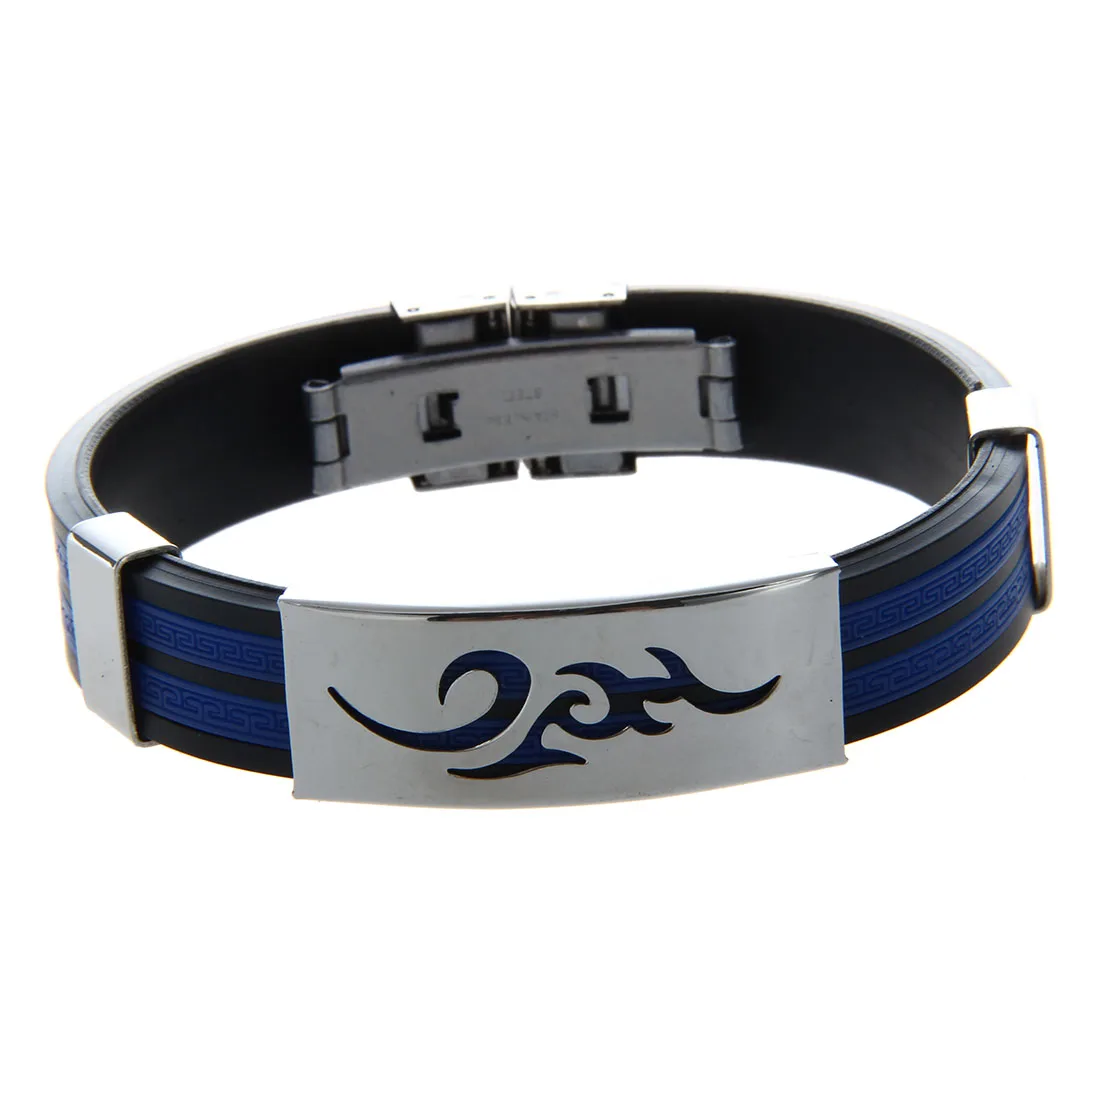 

Stainless Steel Flames Black Blue Silicone Bangle Cuff Bracelet Wristband Men